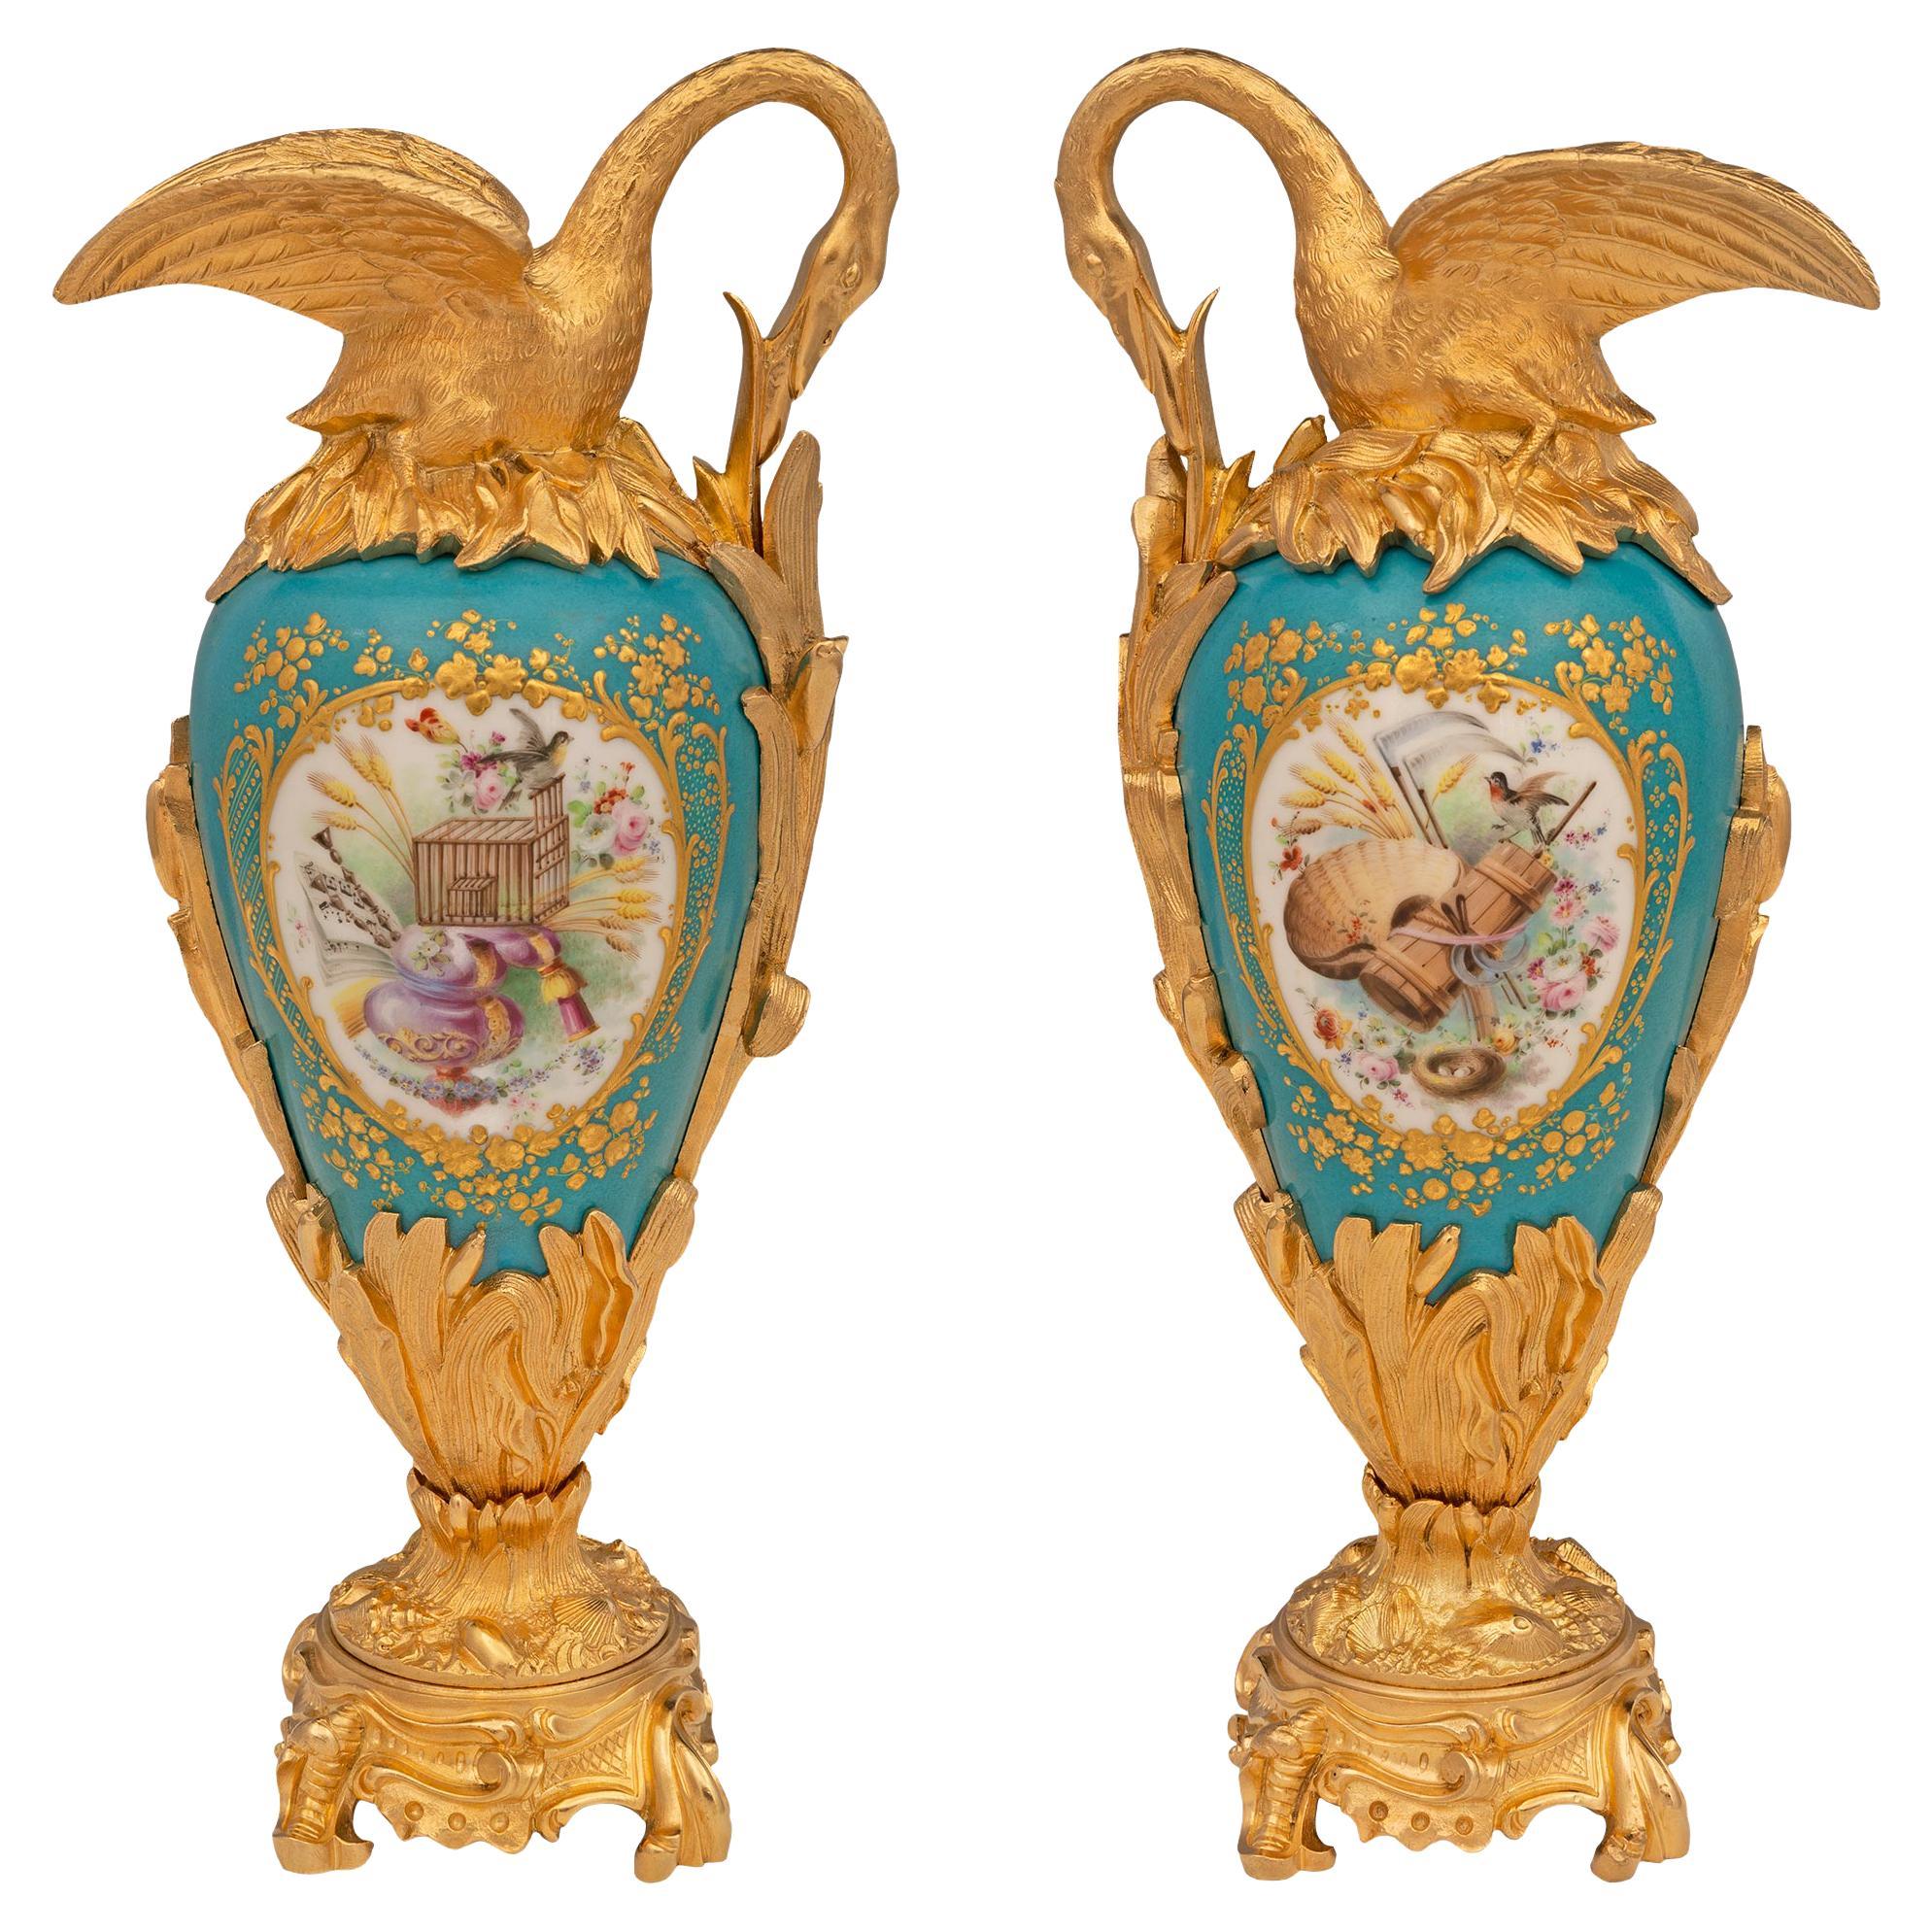 Pair of French 19th Century Louis XVI St. Sèvres Porcelain and Ormolu Ewers